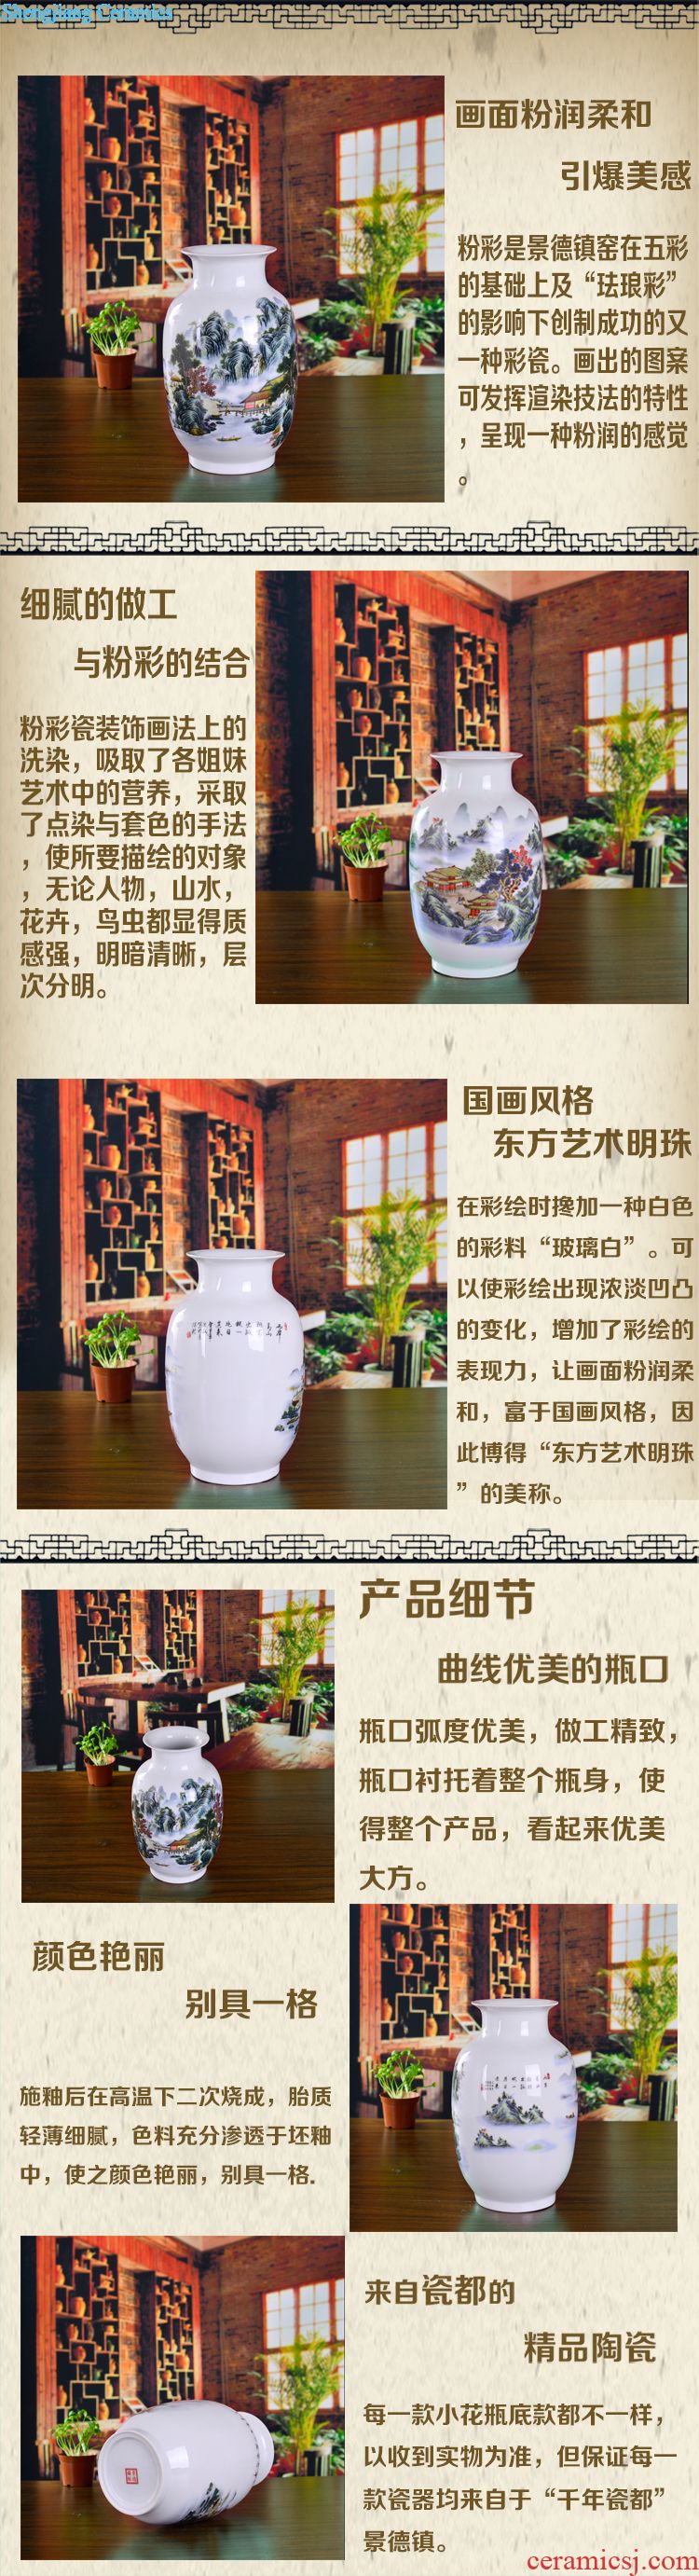 Jingdezhen ceramic vase modern blue and white porcelain painting orchid home sitting room place flower crafts gifts